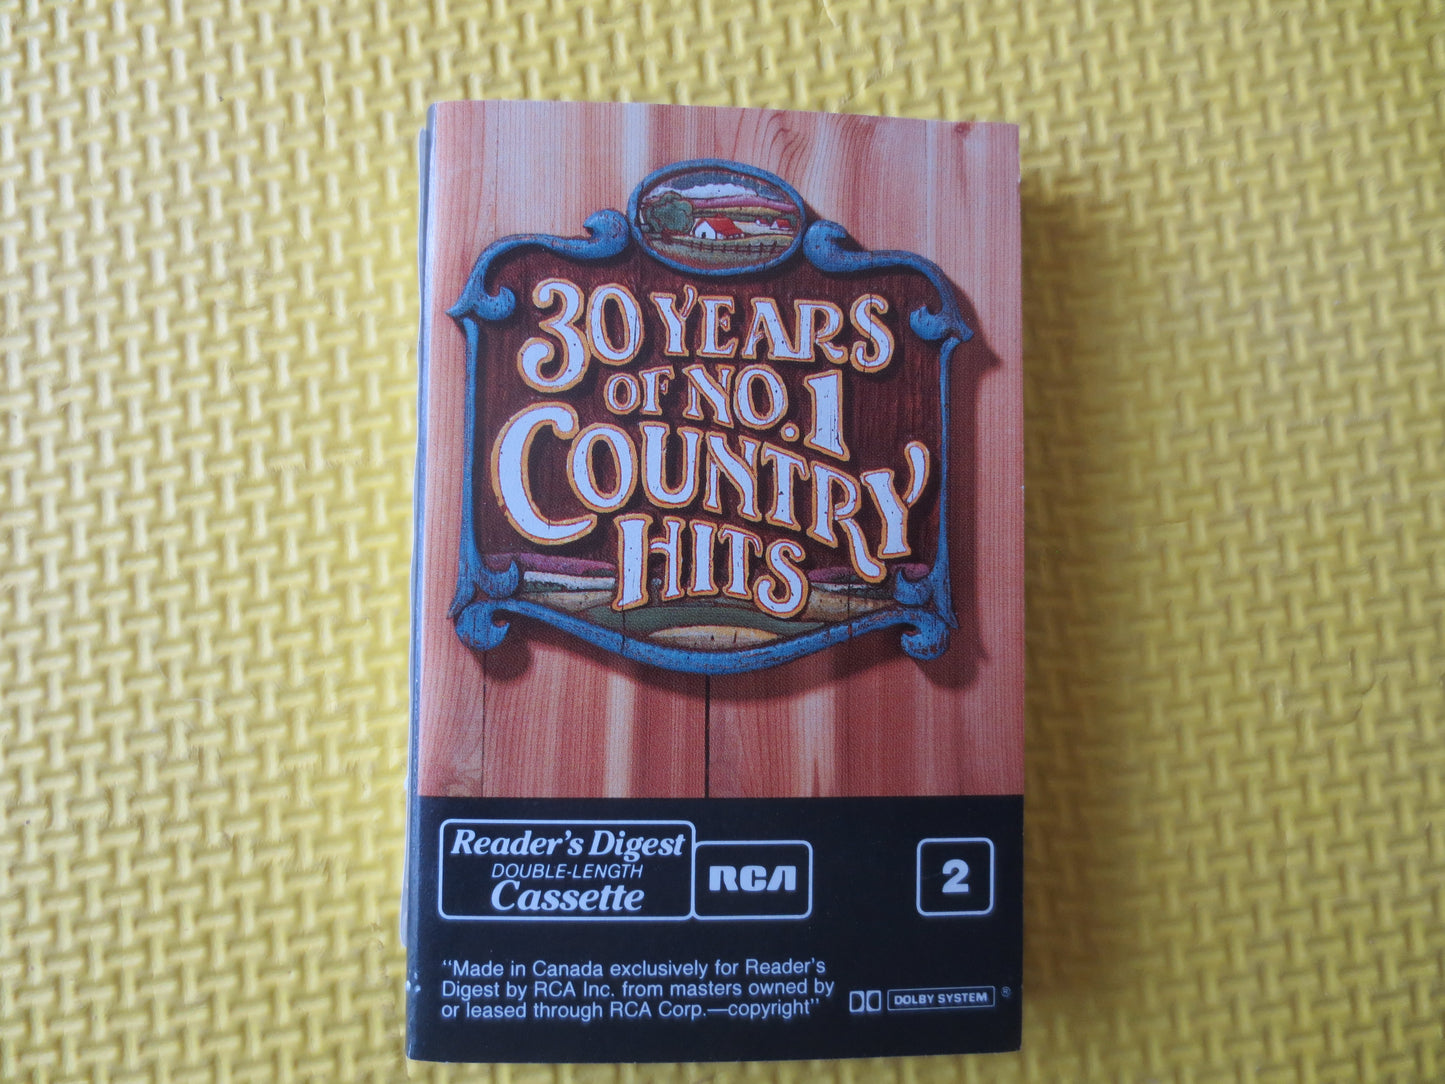 30 Years of NUMBER 1 Hits, COUNTRY Music Tape, Readers Digest Tape, Tape Cassette, Country Cassette, Cassette, 1986 Cassette